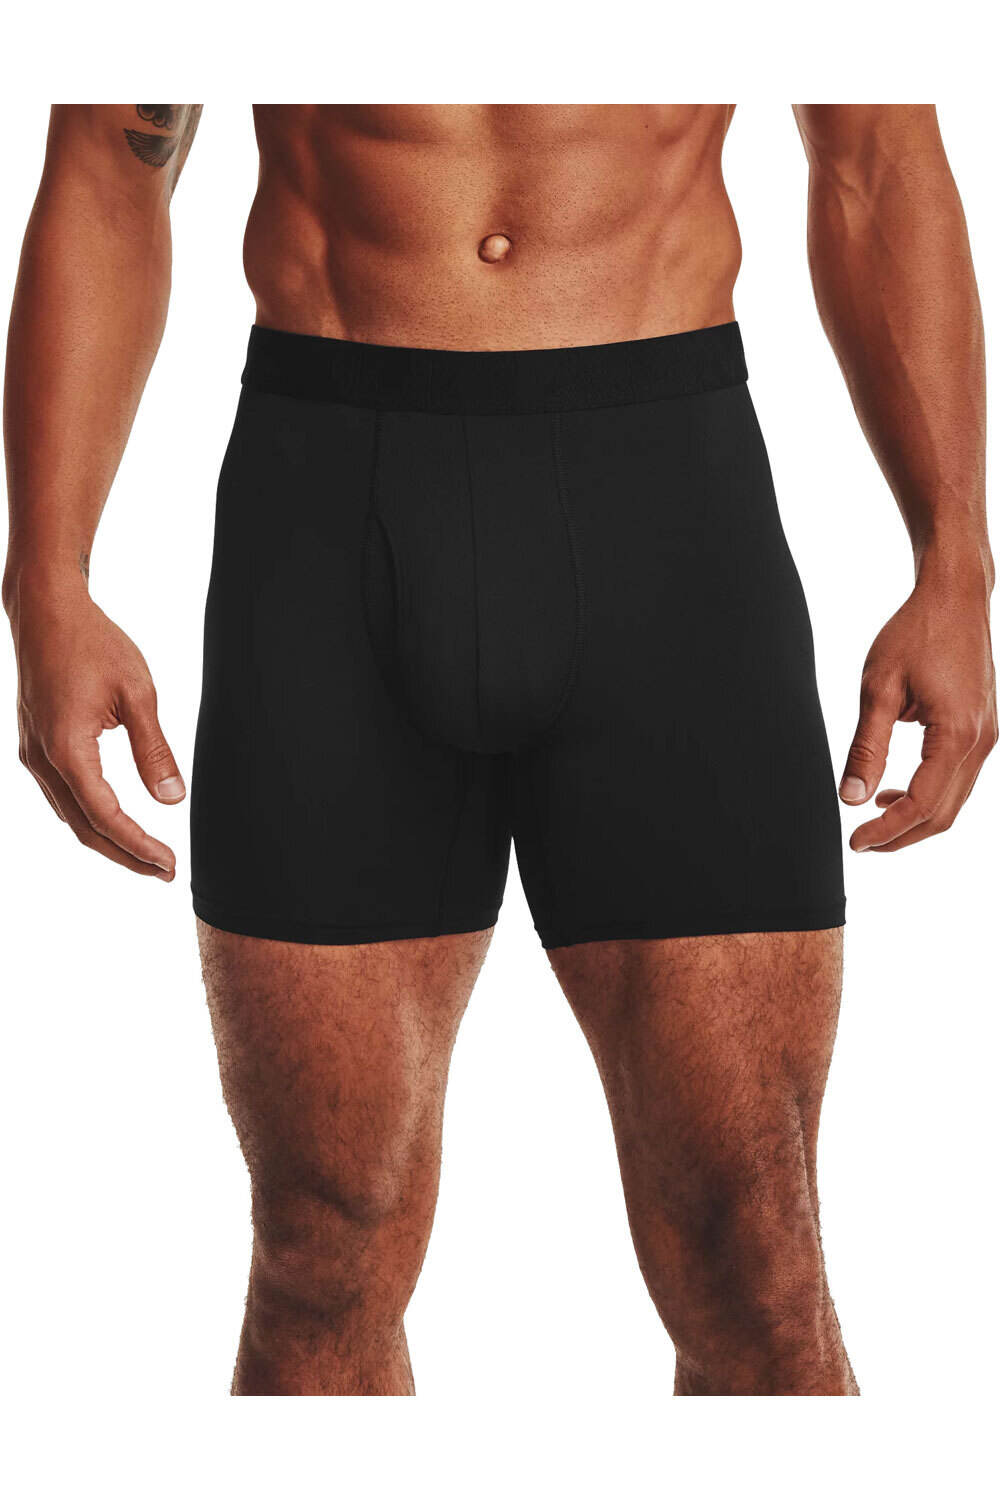 Under Armour boxer UA Tech Mesh 6in 2 Pack vista frontal